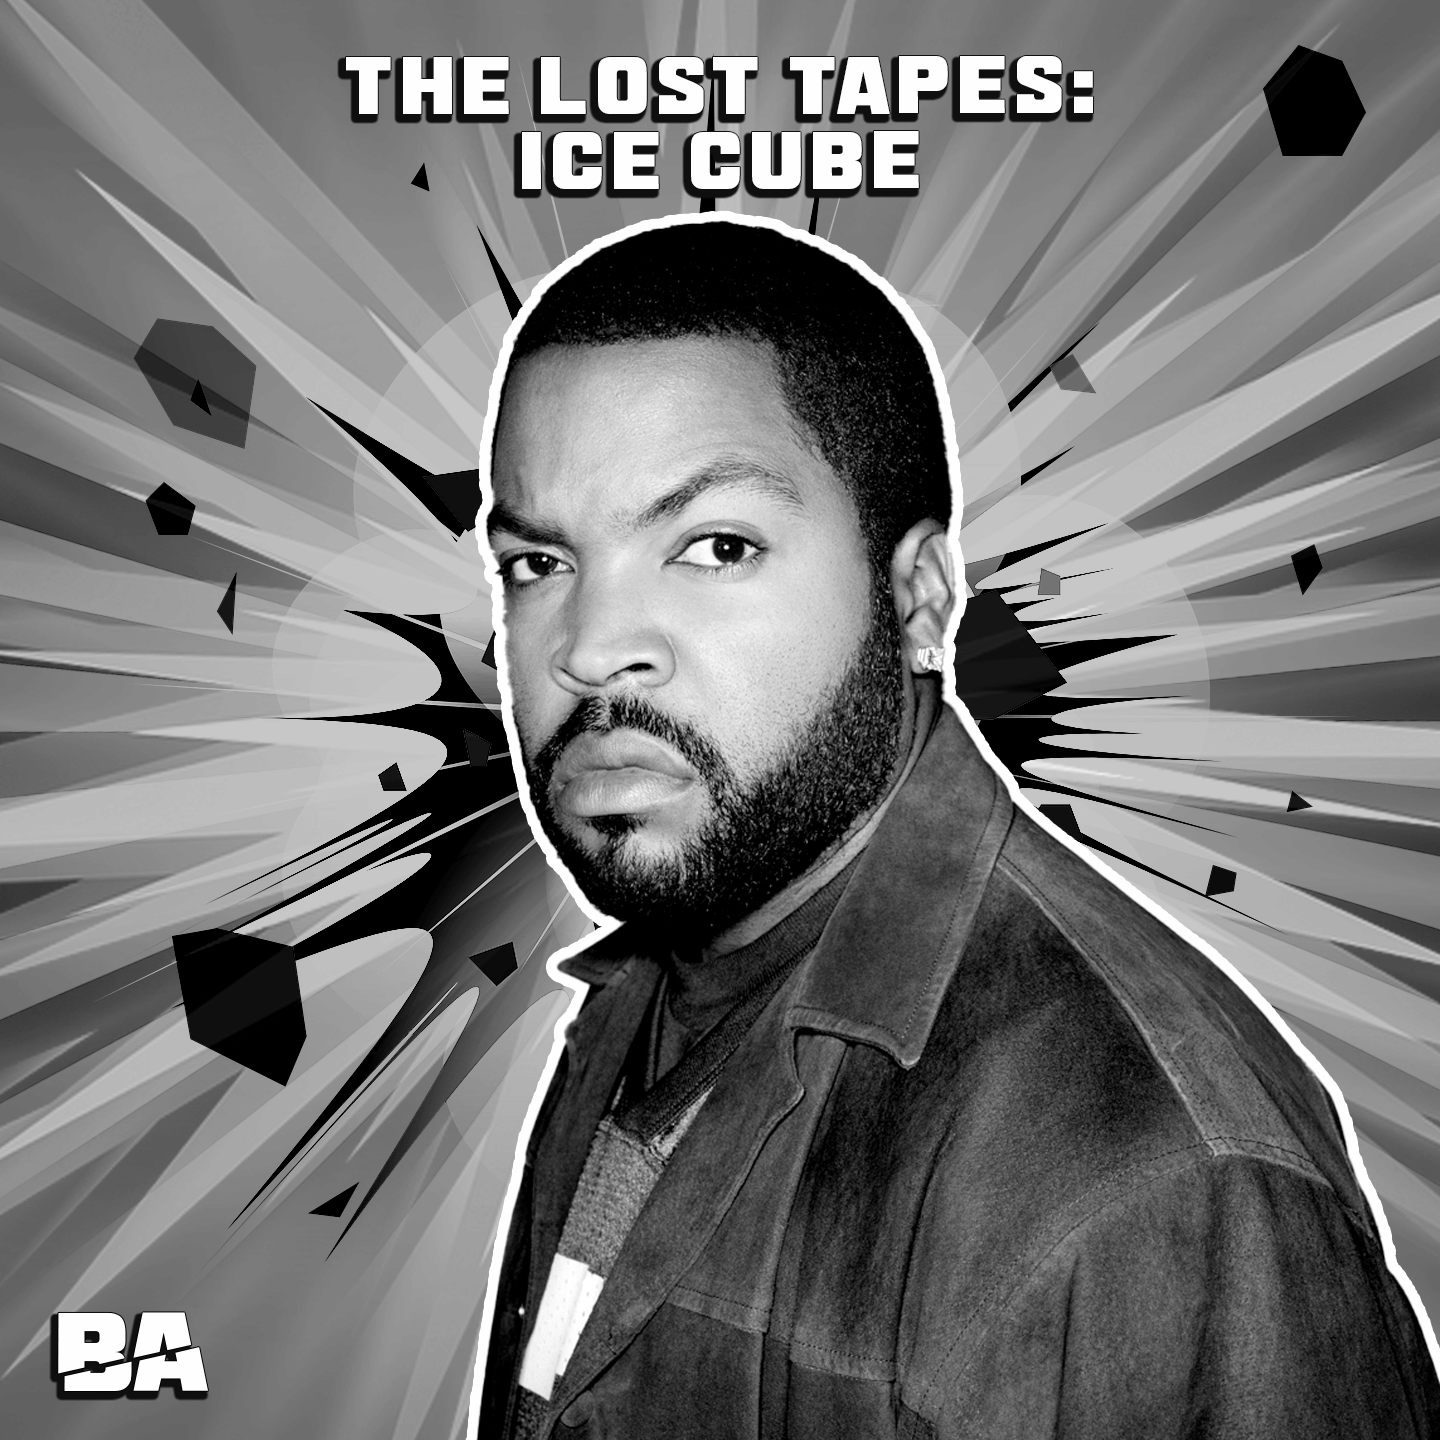 The Lost Tapes: Ice Cube